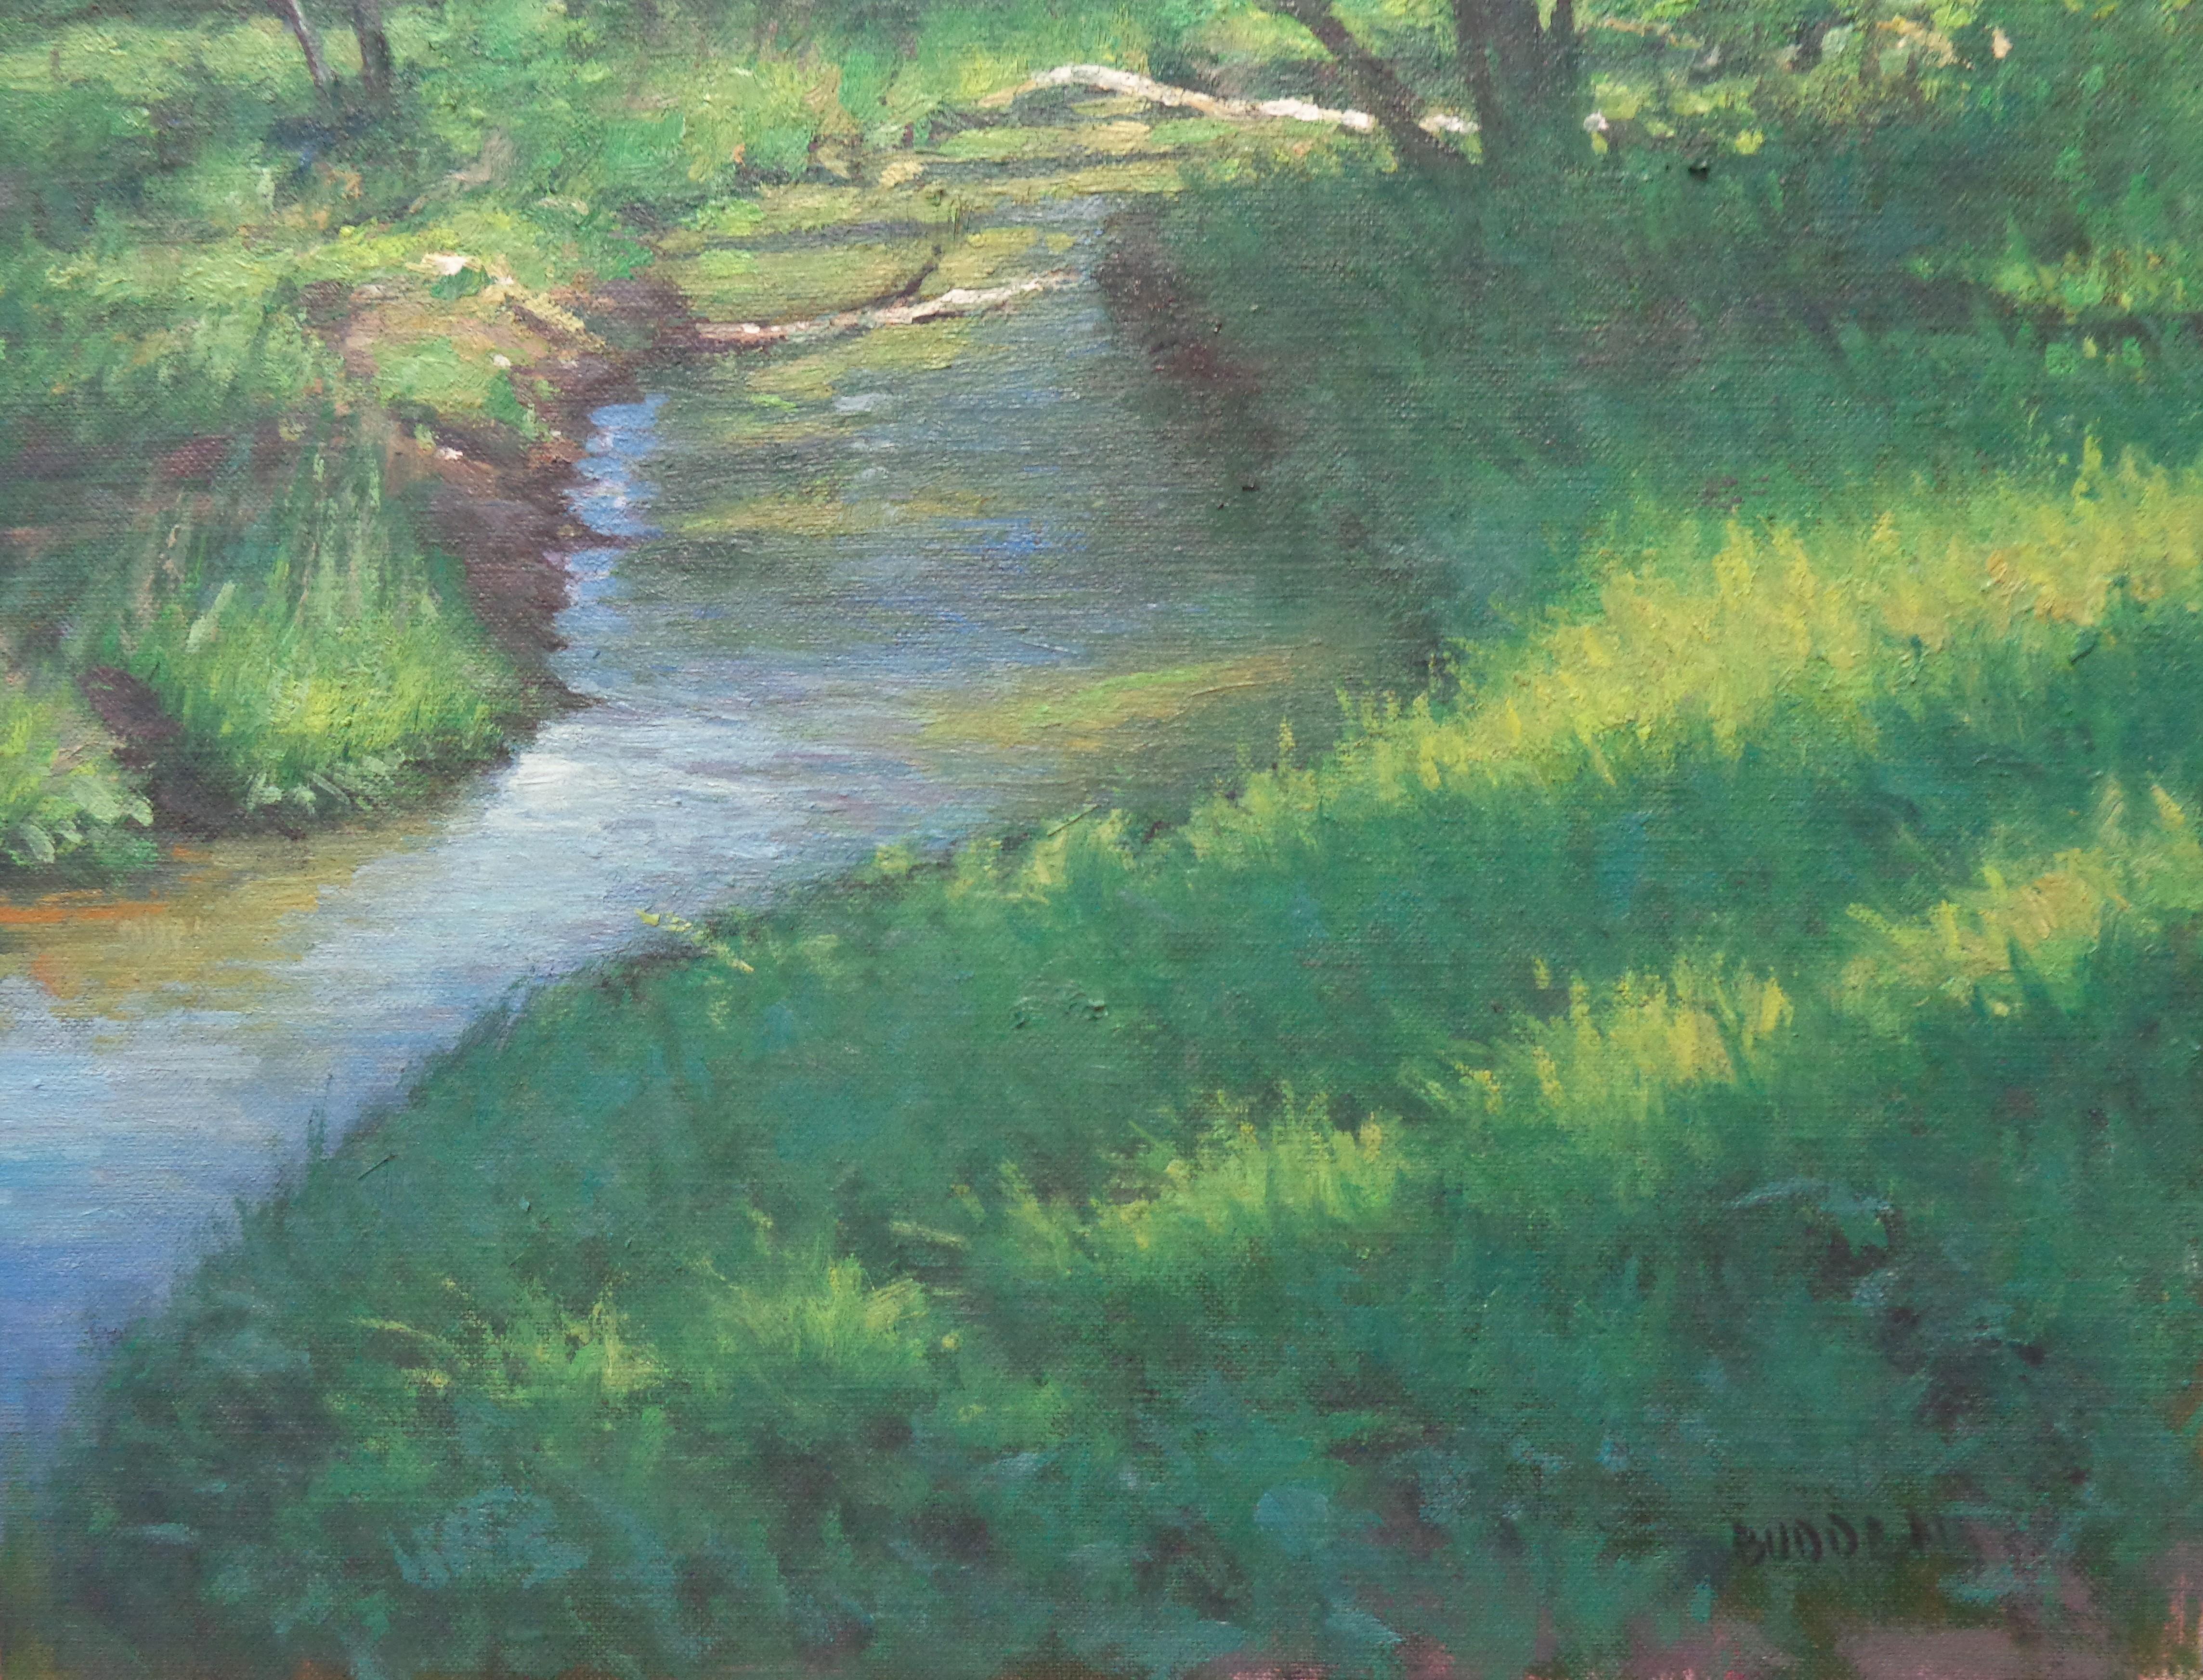  Impressionistic Landscape Oil Painting Michael Budden Spring Stream For Sale 4